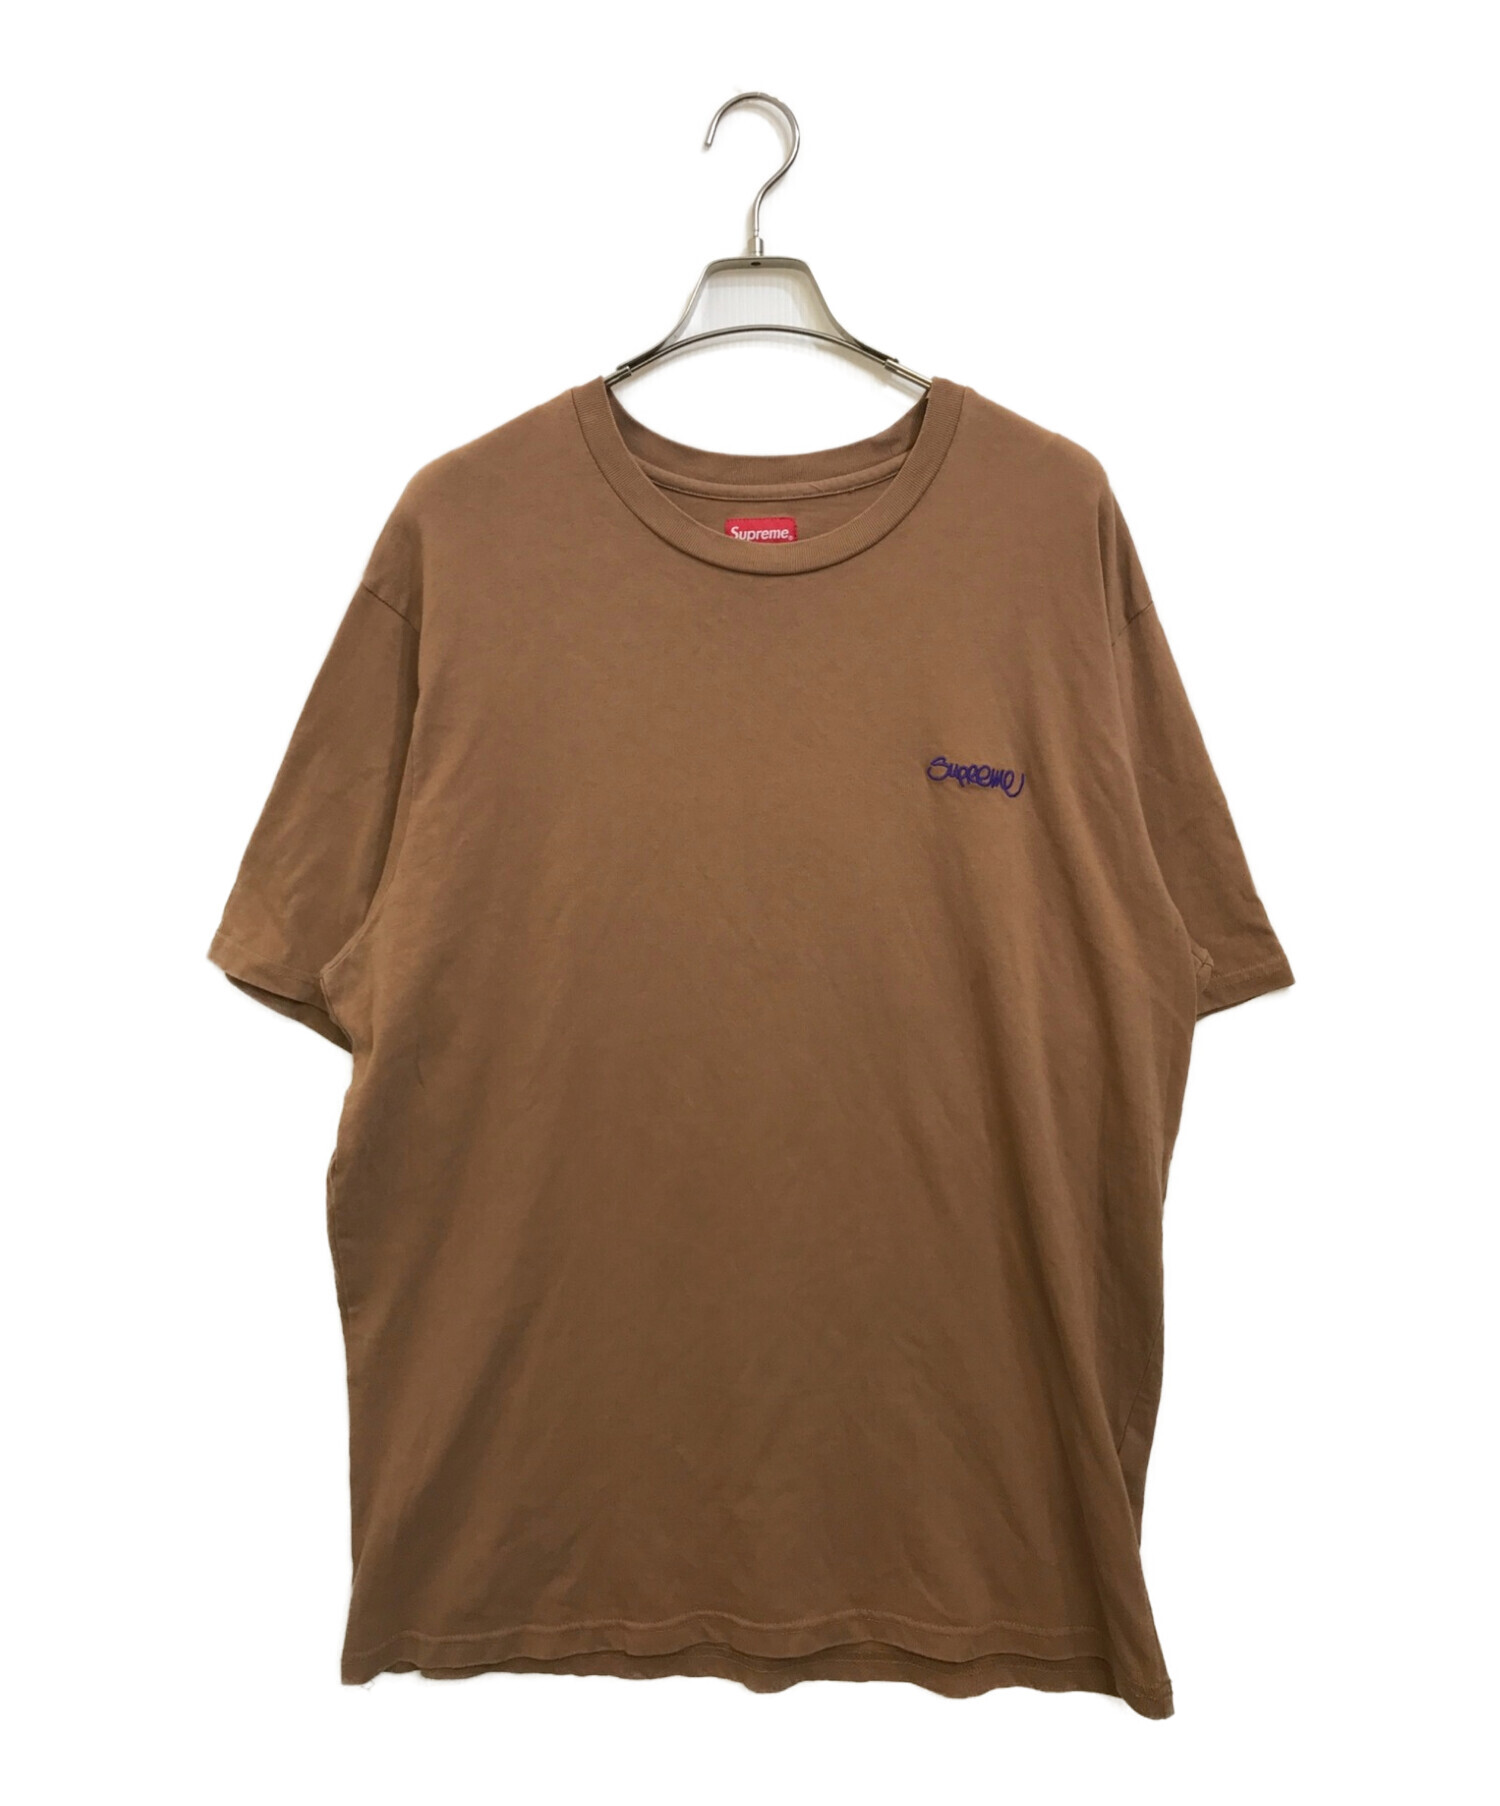 Supreme (シュプリーム) Washed Handstyle S/S Top ブラウン サイズ:XL